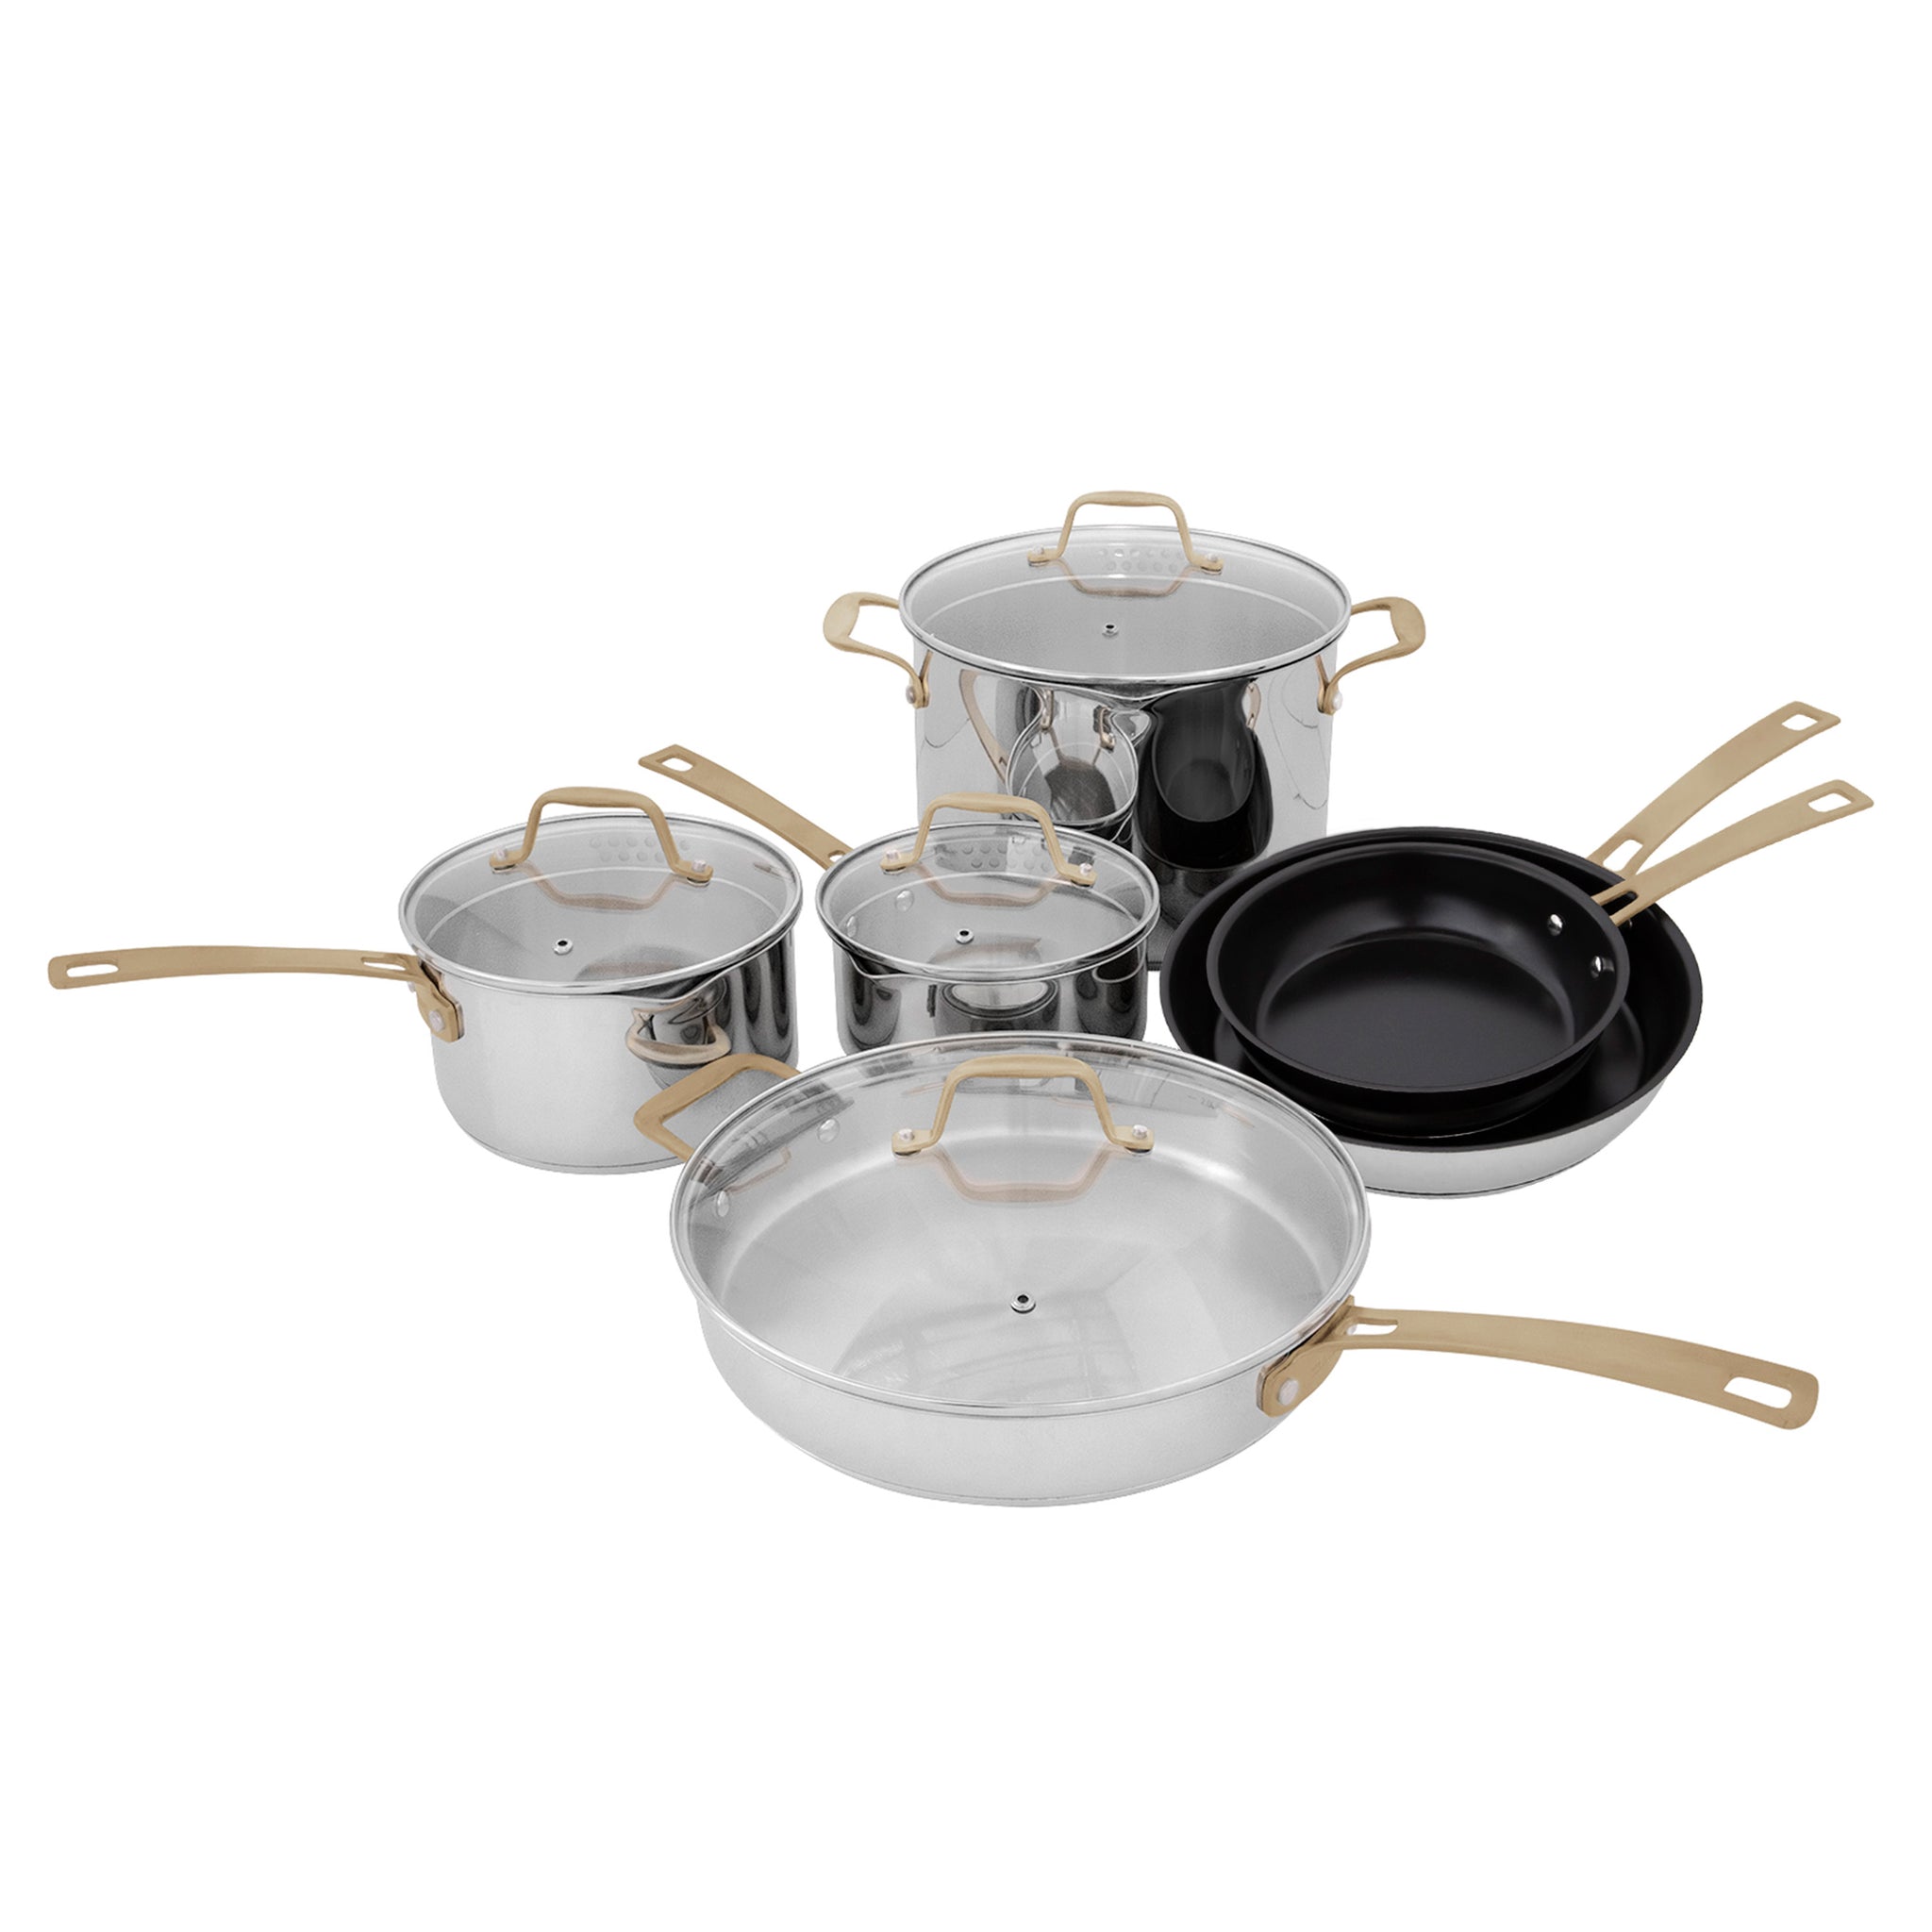 ZLINE 10 Piece Non-Toxic Stainless Steel and Nonstick Ceramic Cookware Set with Bronze Trim